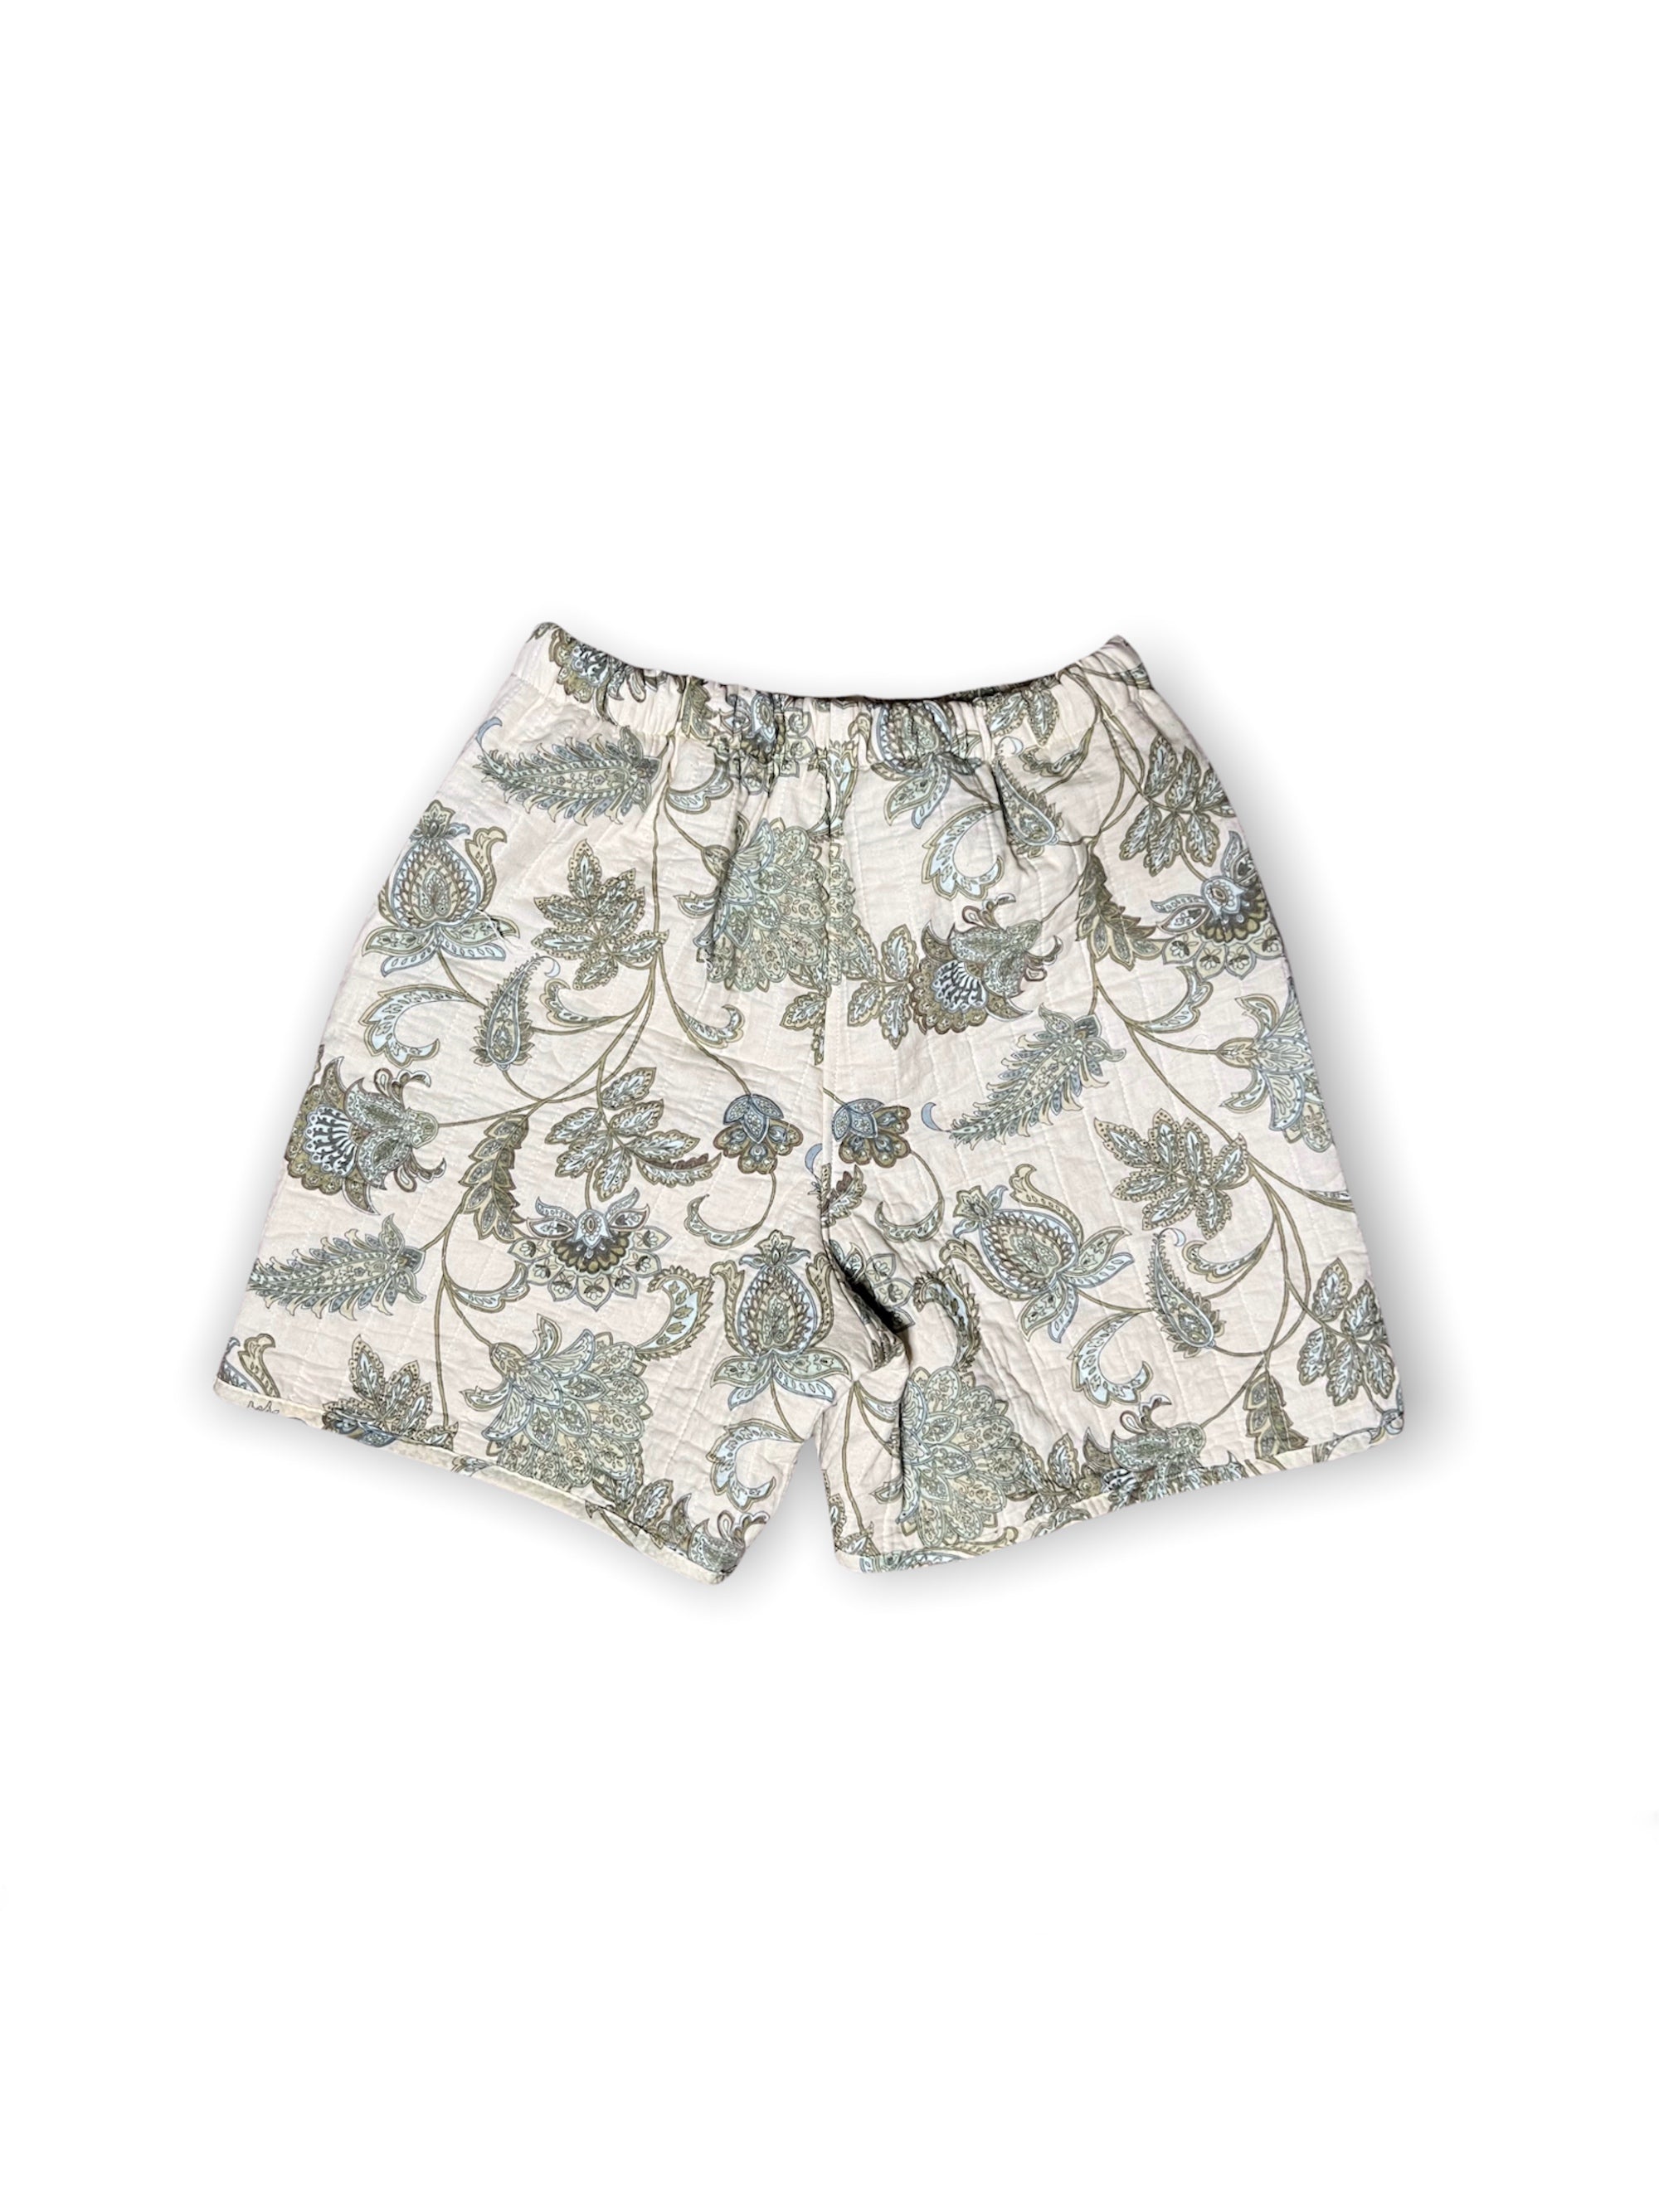 Reworked unisex quilted green paisley print shorts